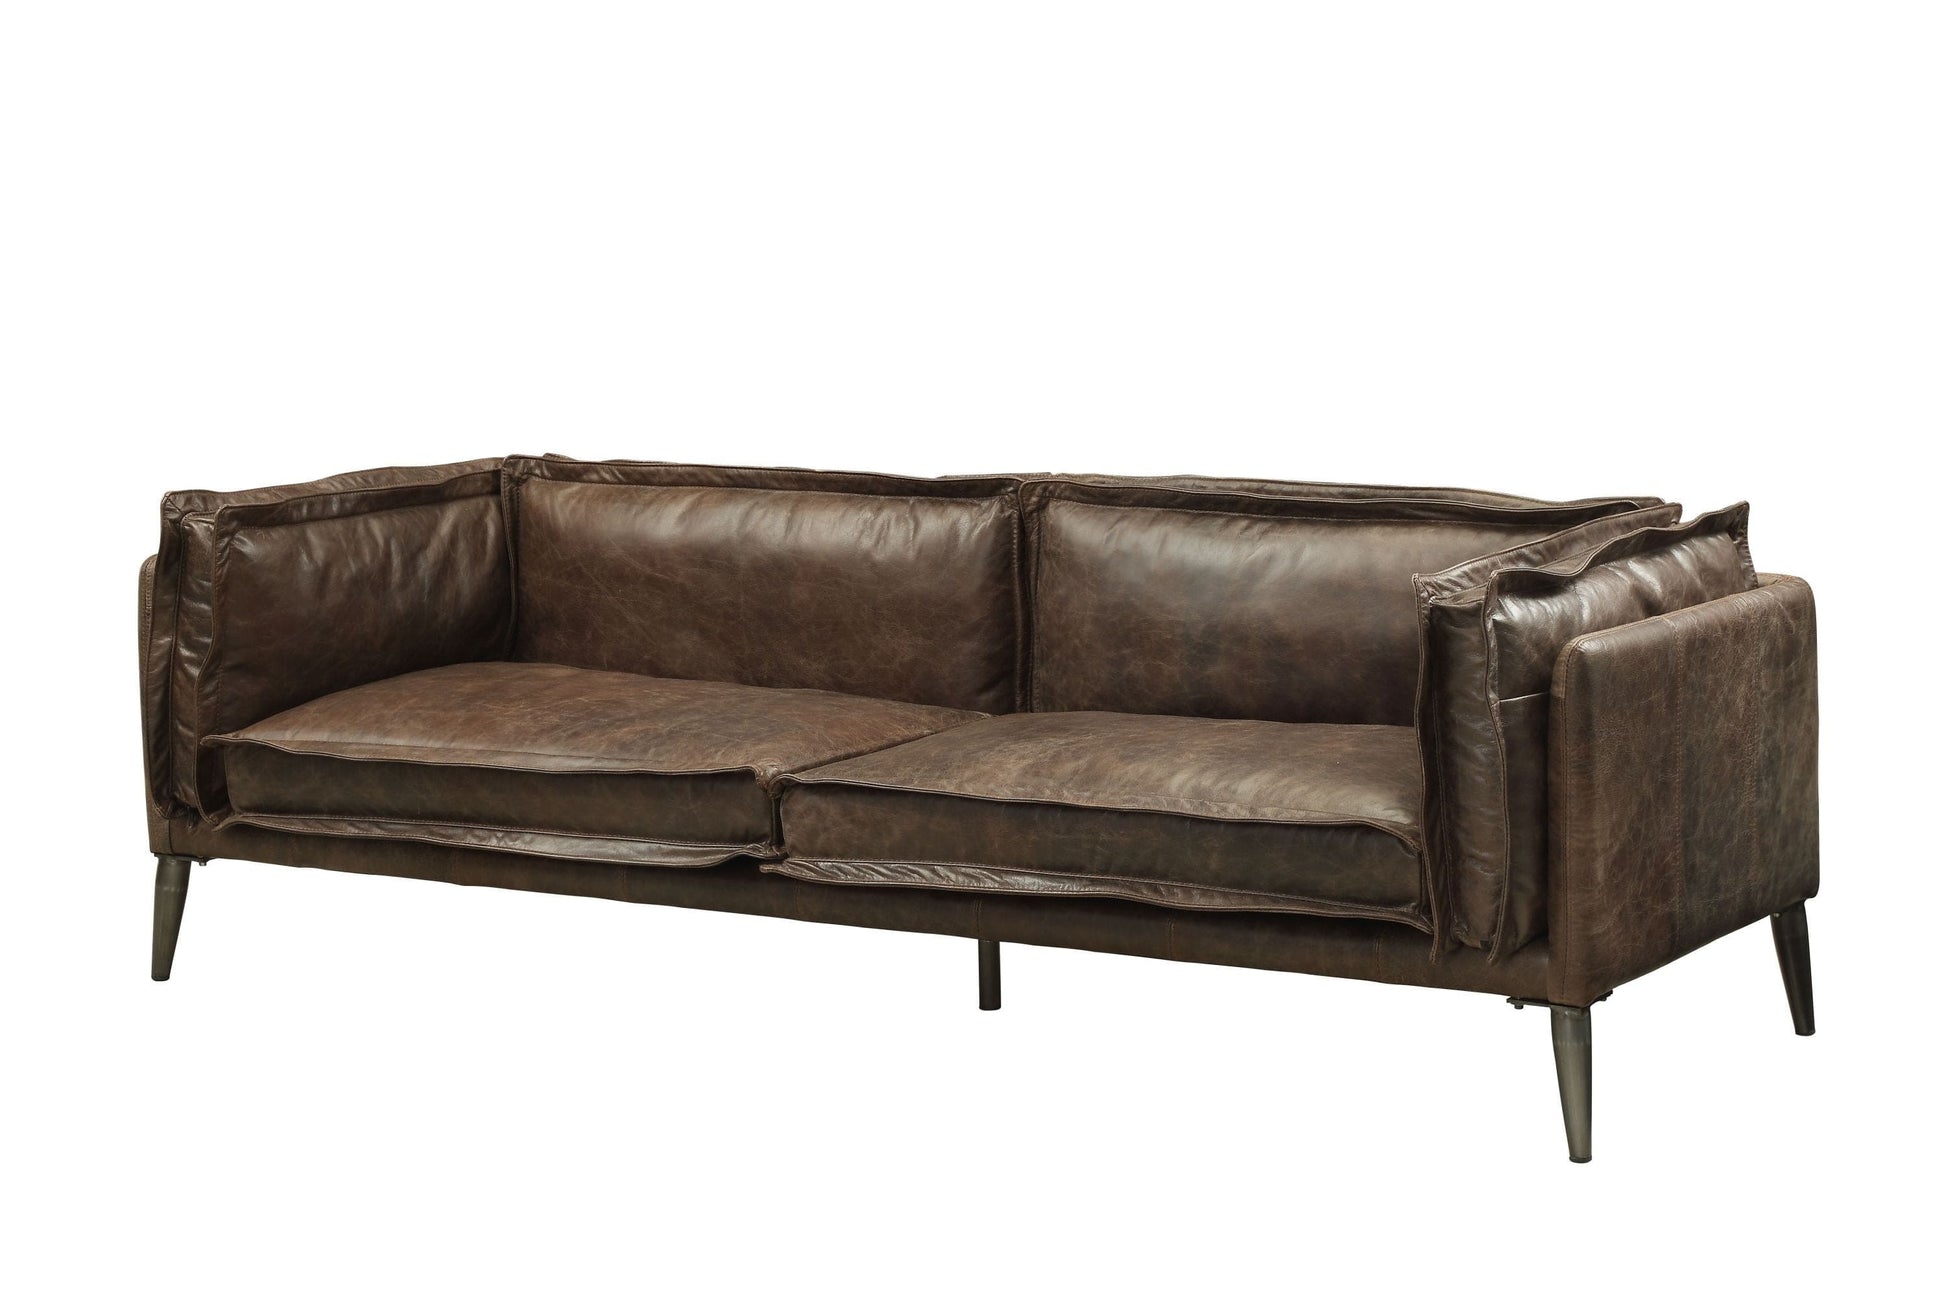 1st Choice Furniture Direct Loveseat 1st choice Porchester Loveseat in Distress Chocolate Top Grain Leather